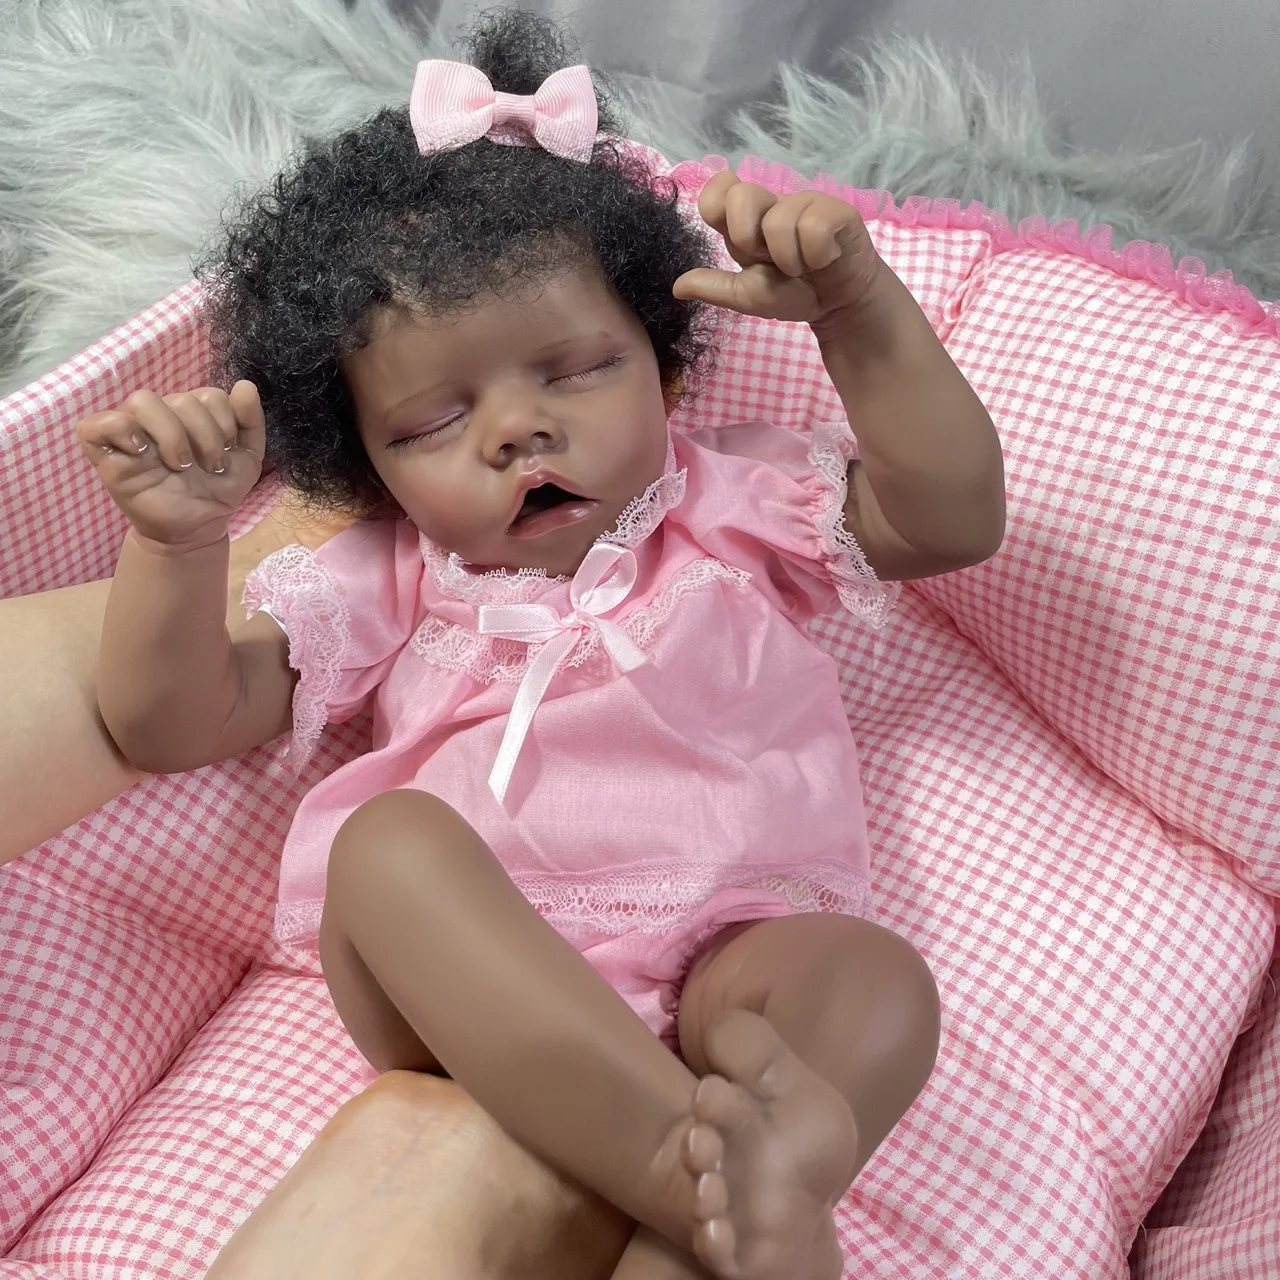 43CM African American Reborn Baby Doll Twin A Premature Baby Finished Newborn Black Girl Collectible Art - Reborn Doll World